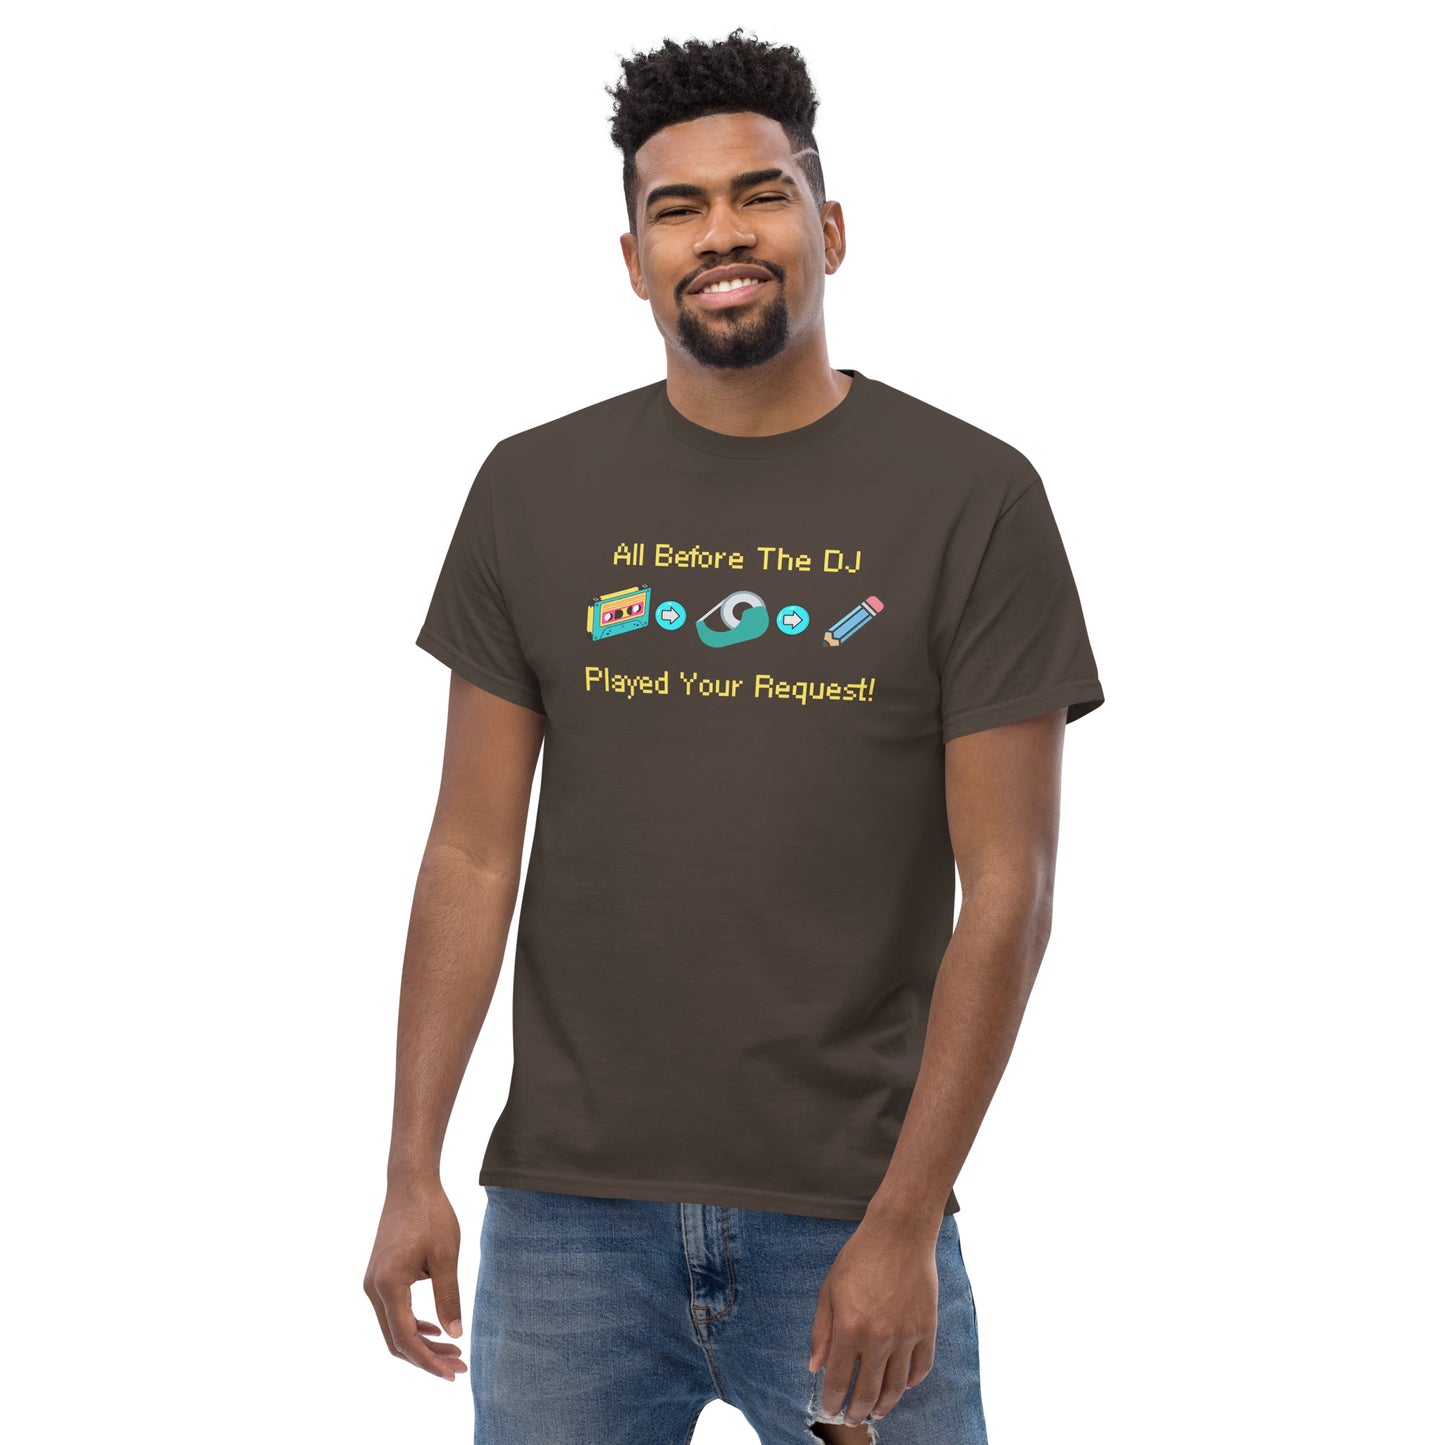 All Before The DJ Played Your Request! Men's classic tee